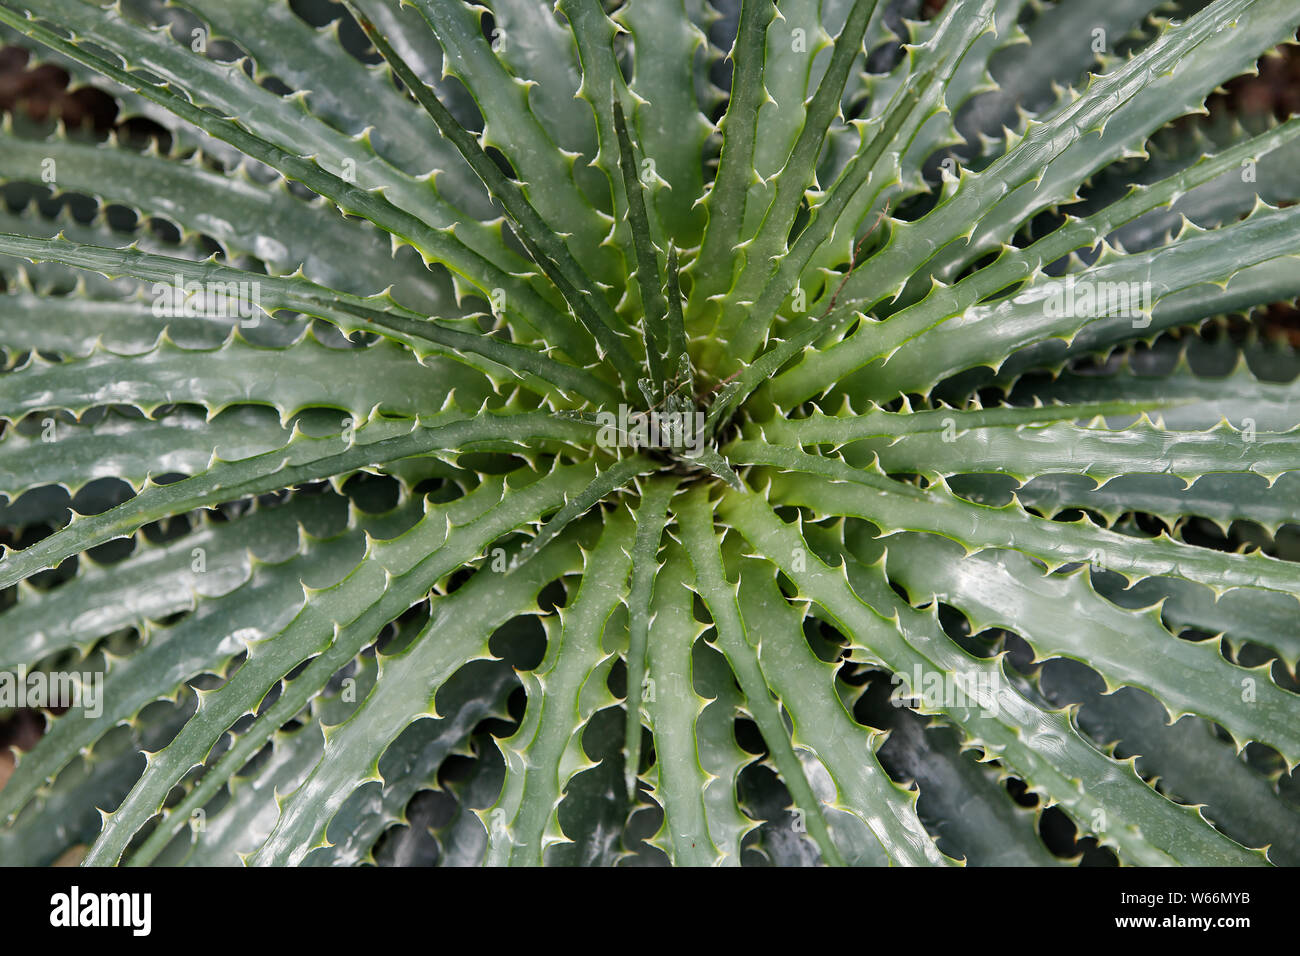 A plant of Hechtia texensis originally from Mexico, Green Latin American shrub with long spiky leaves as a background image. Green rays. View from abo Stock Photo